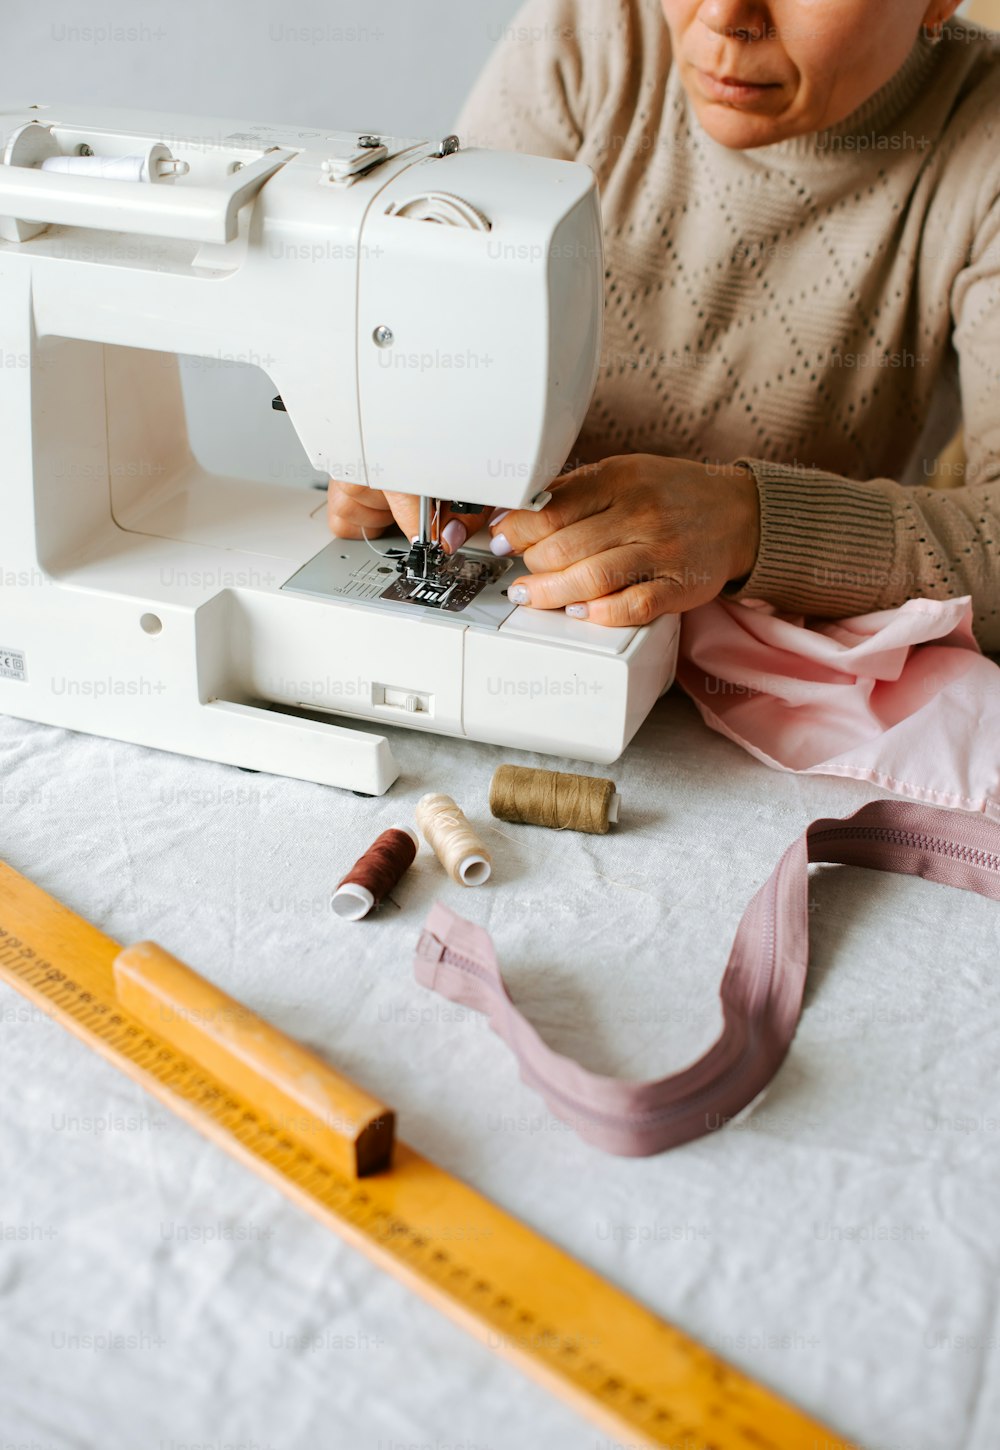 a woman is using a sewing machine on a table